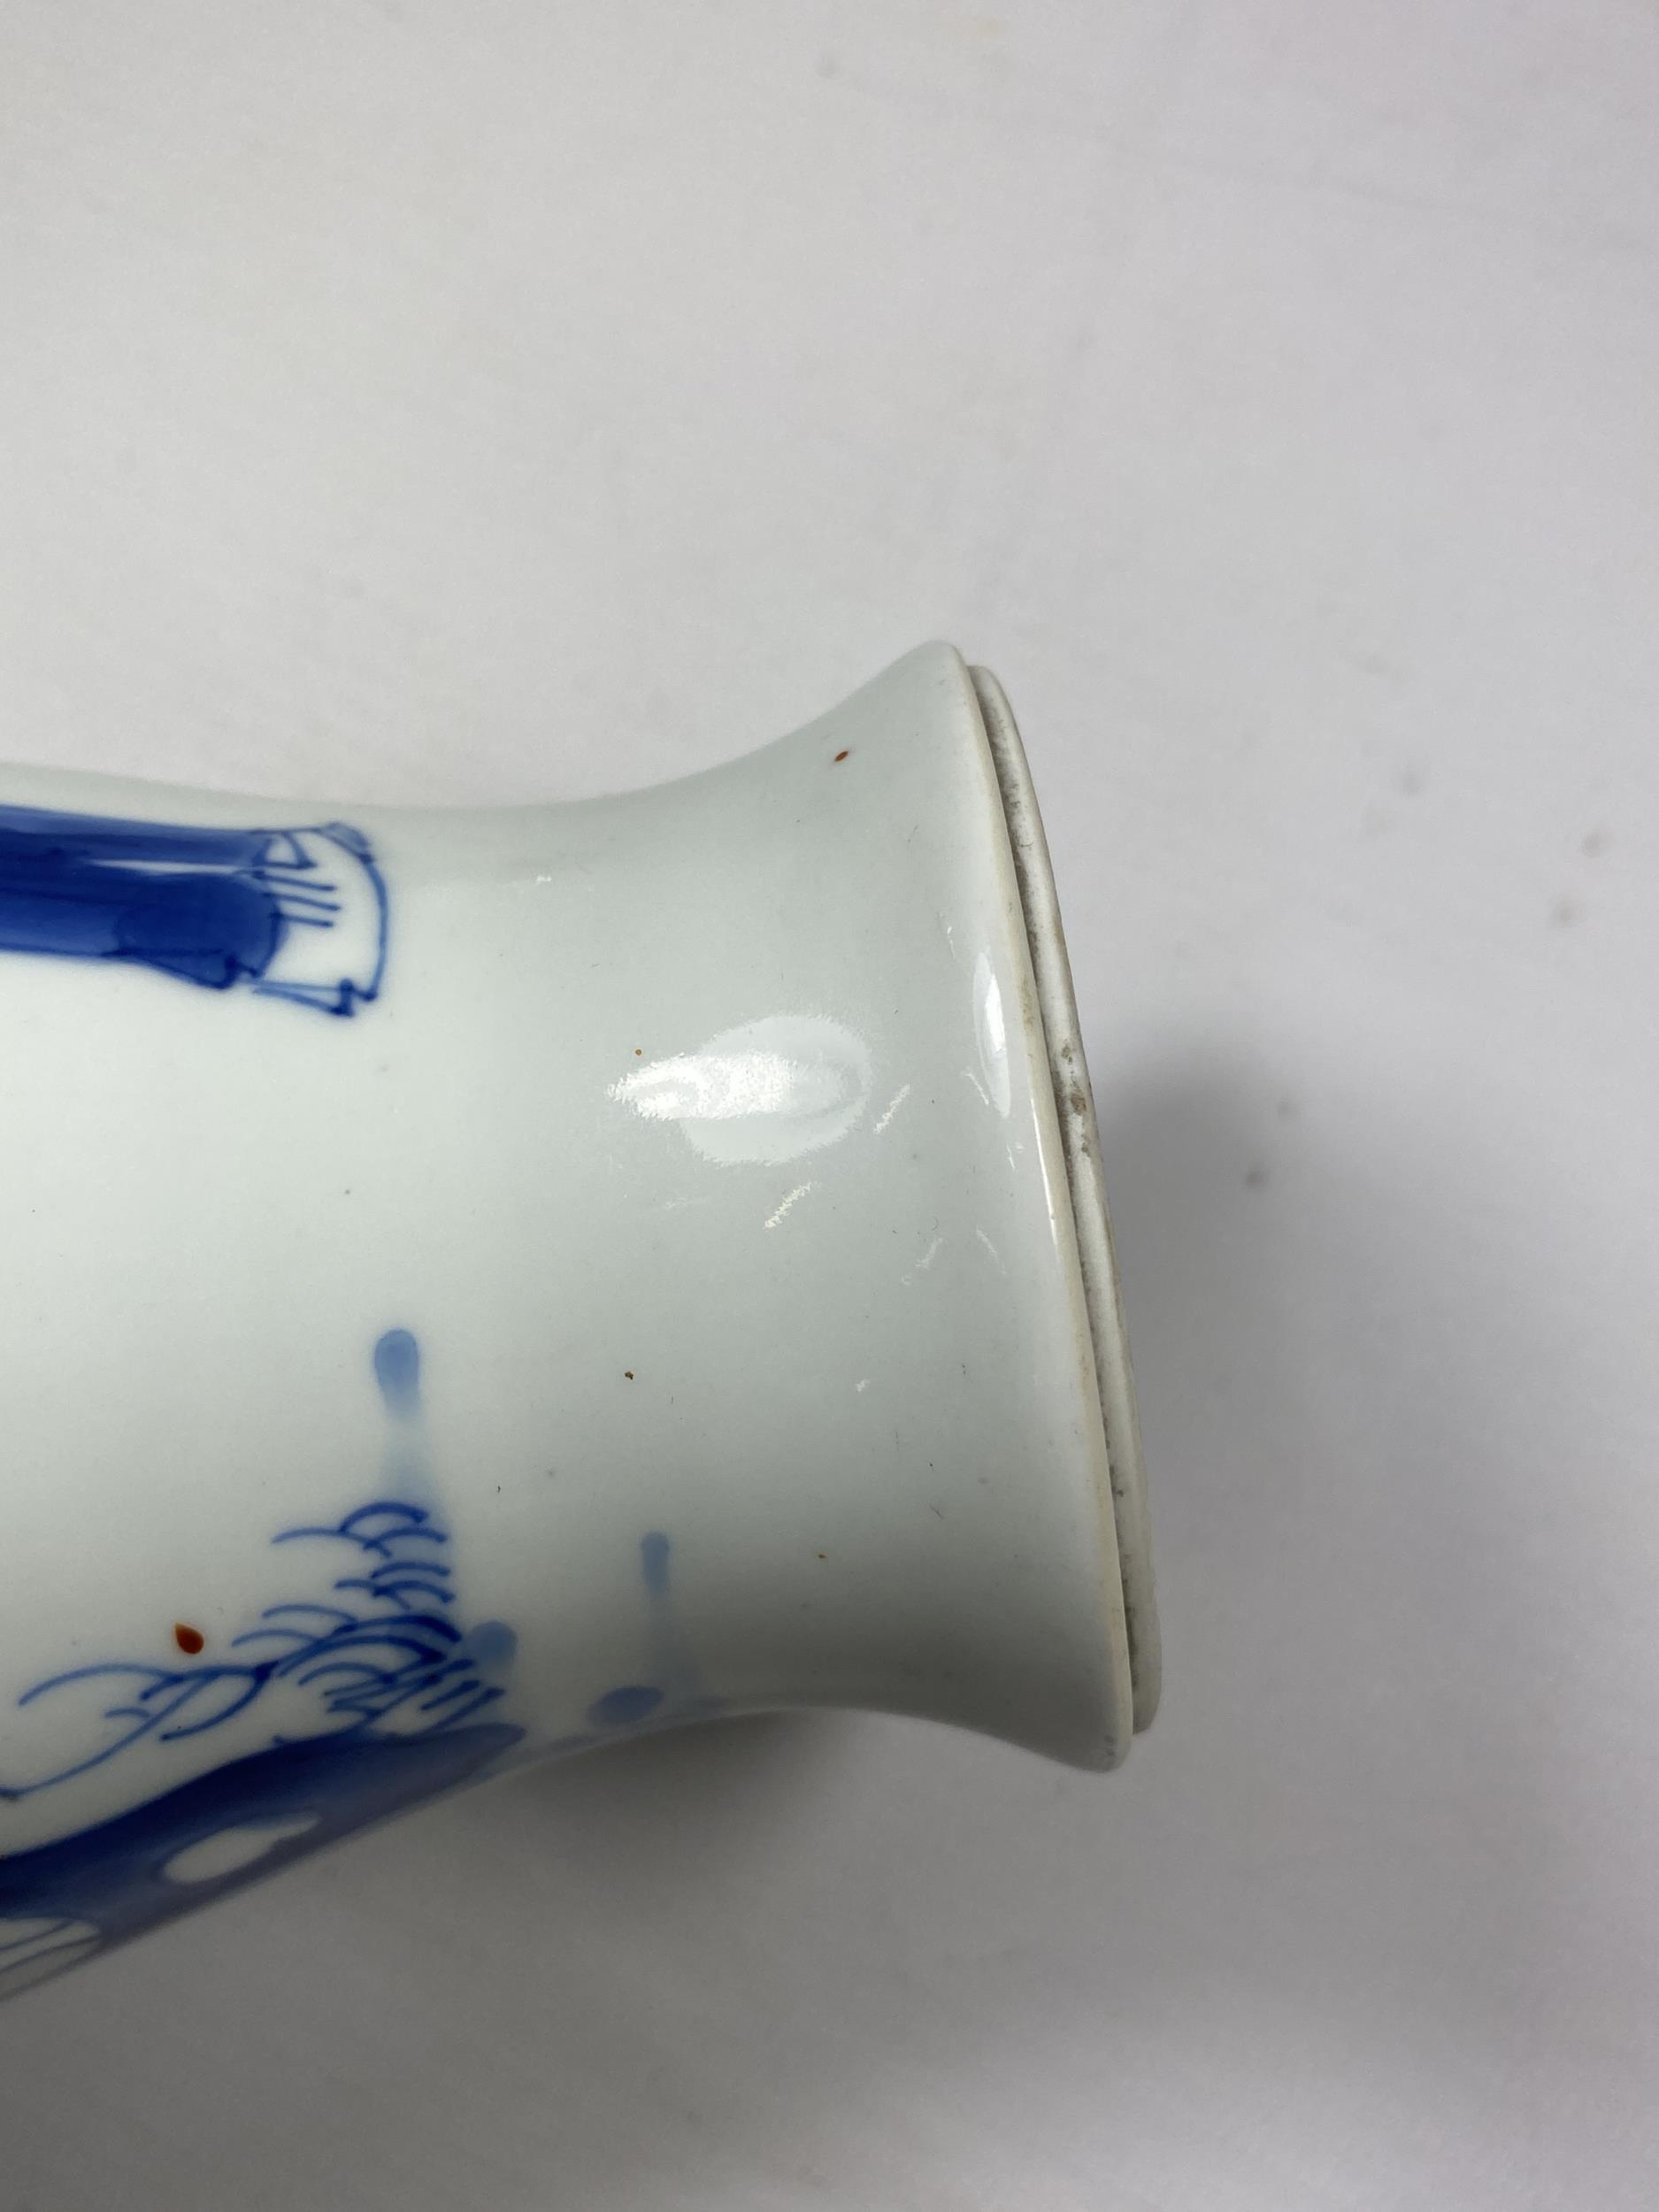 A CHINESE KANGXI PERIOD (1661-1722) BLUE AND WHITE PORCELAIN BALUSTER FORM VASE DEPICTING FIGURES IN - Image 6 of 7